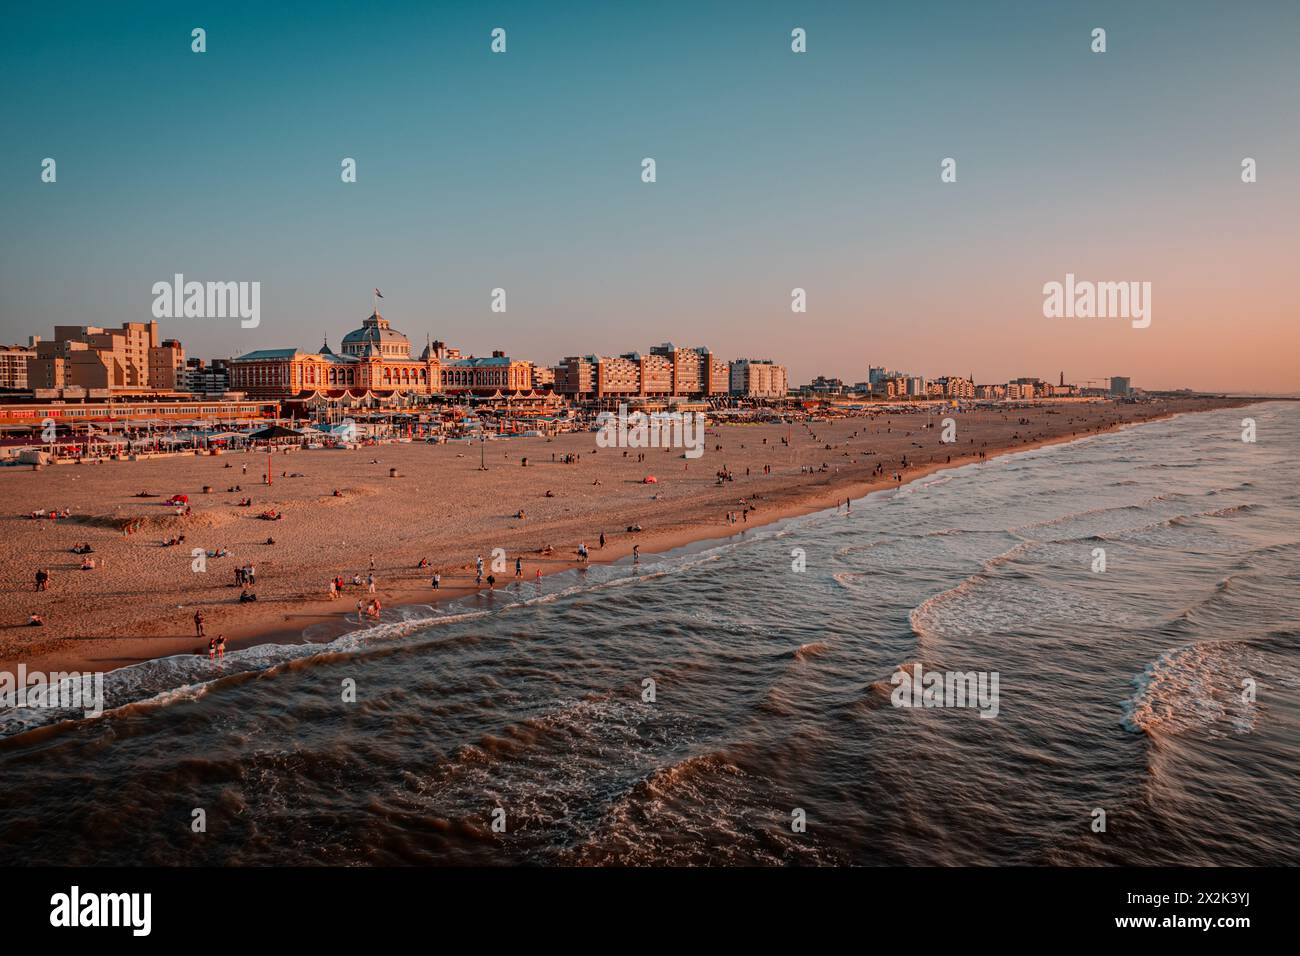 A scenic view of a bustling beach during golden hour, with waves gently lapping the shore and a vibrant city skyline in the background. Stock Photo